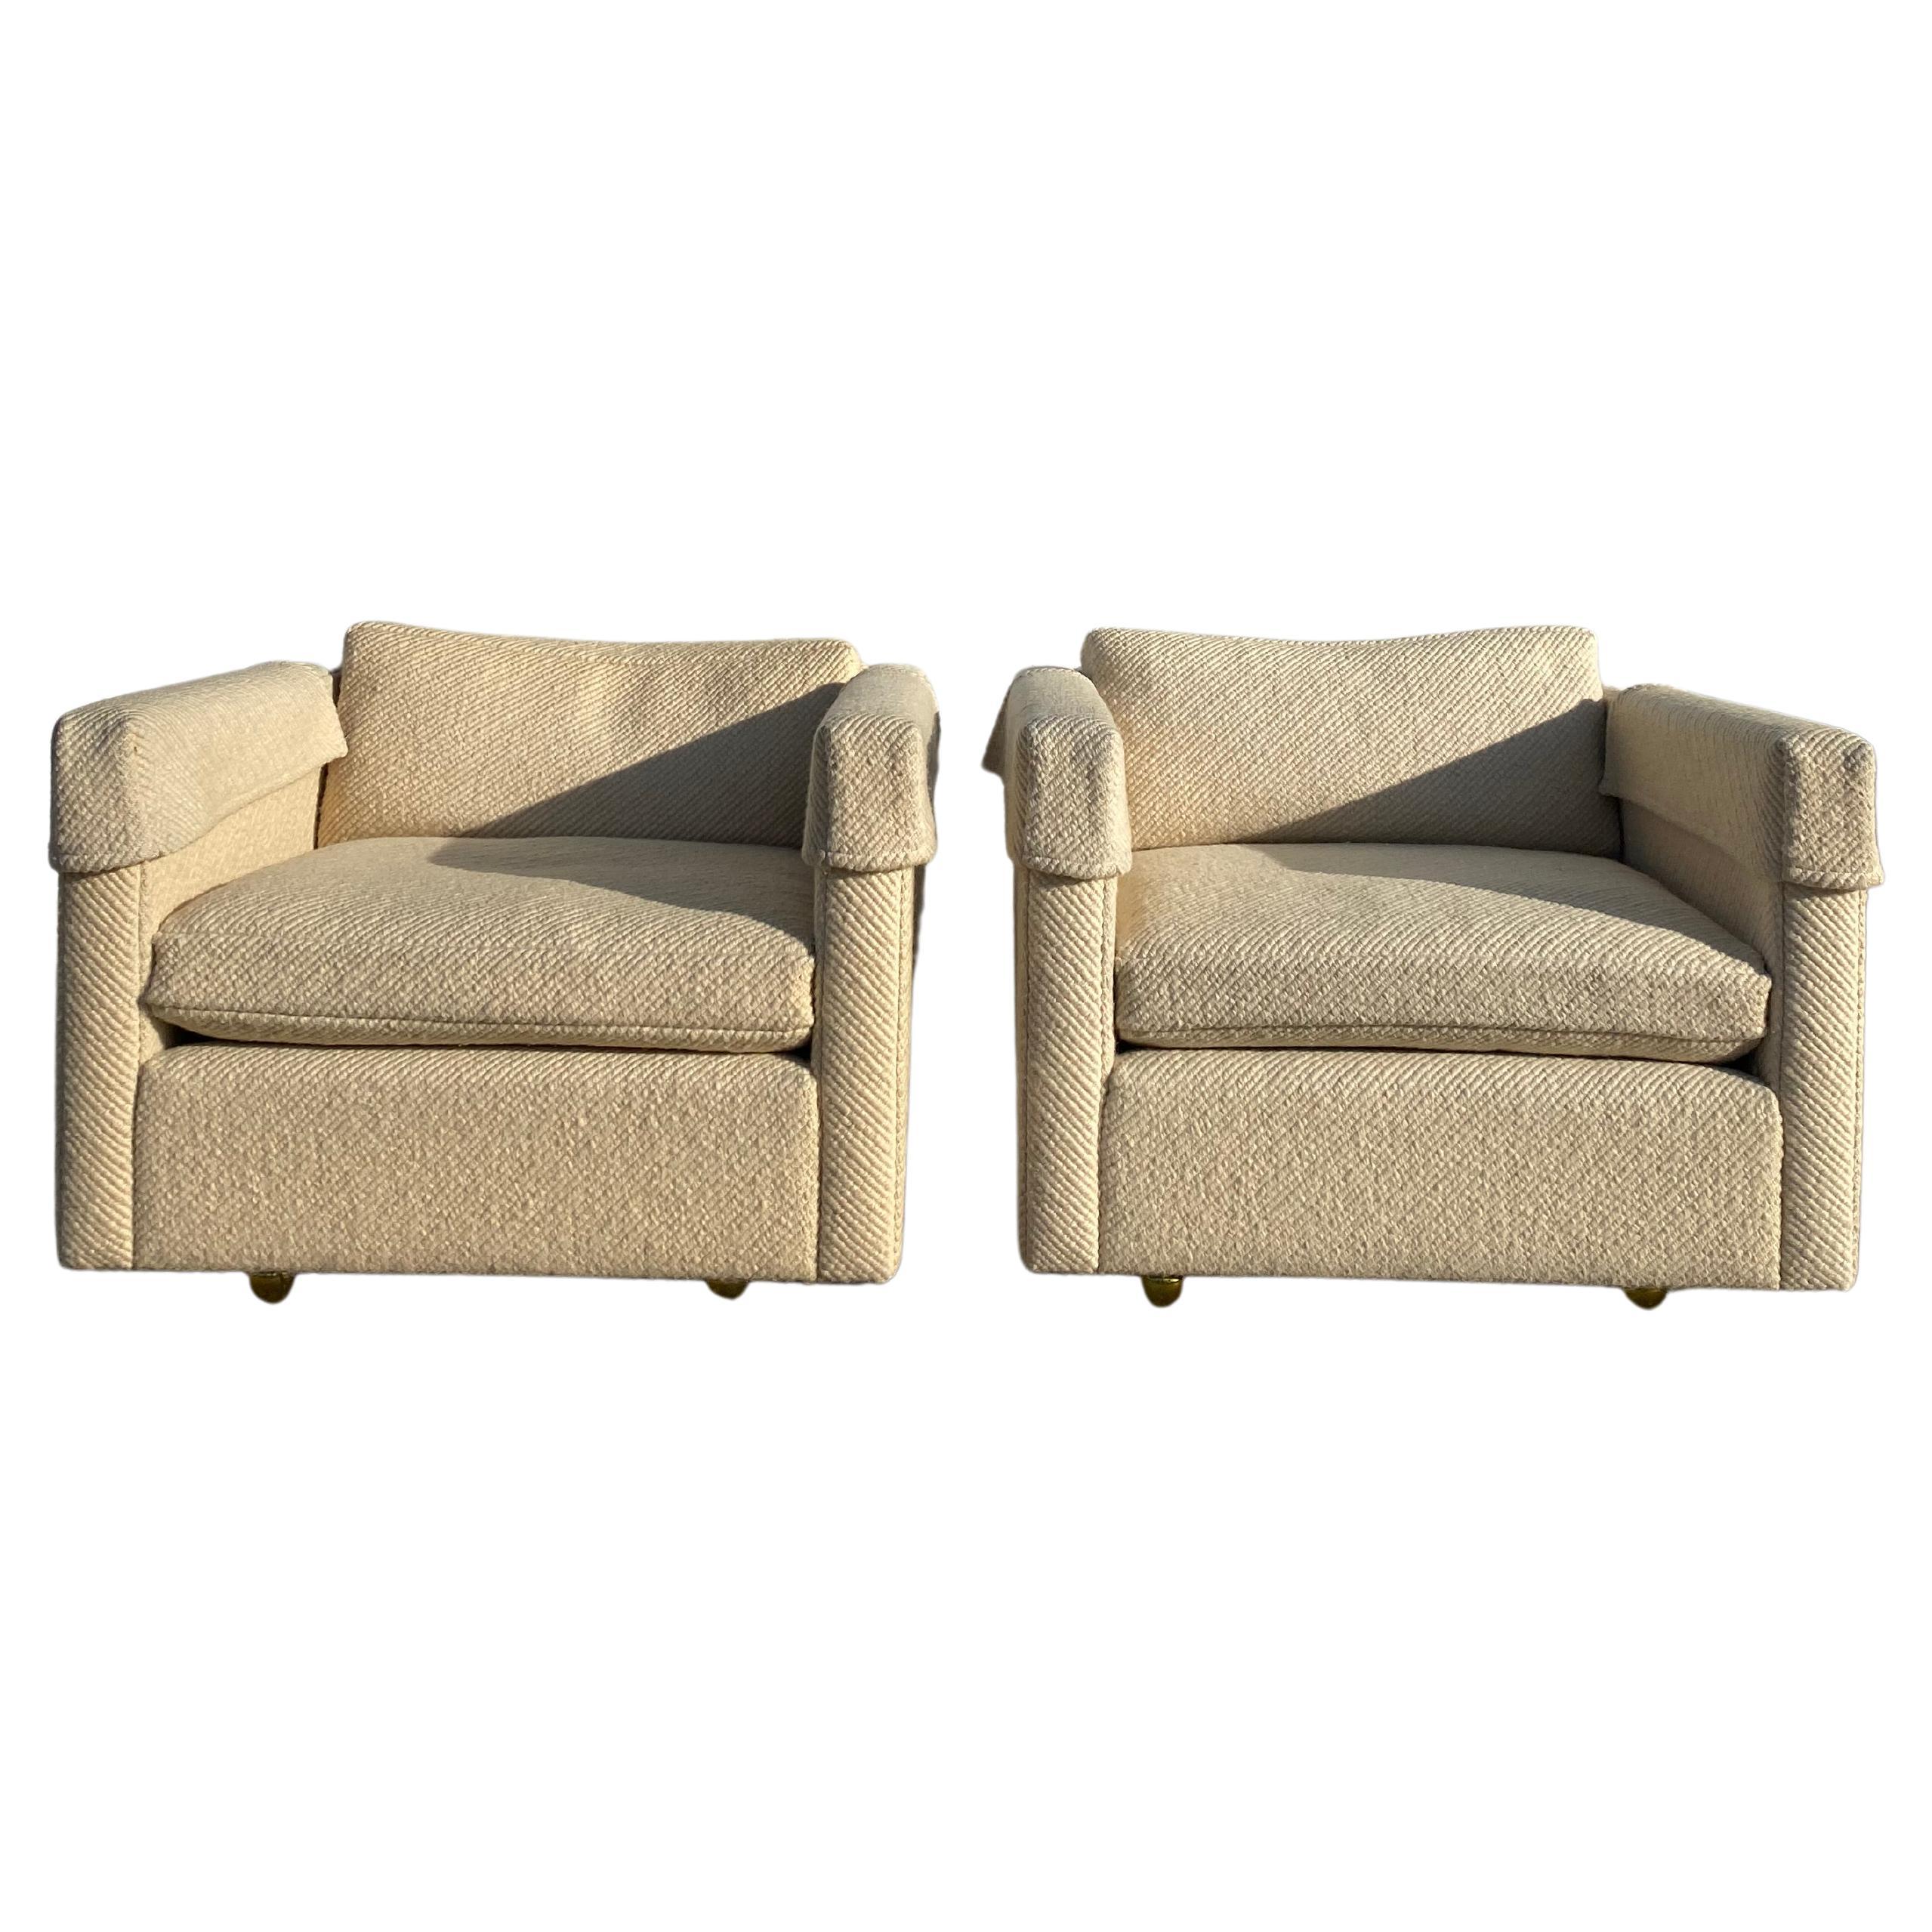 1970s Pair of Charles Pfister Cube Lounge Chairs for Knoll in Original Wool  Fabr For Sale at 1stDibs